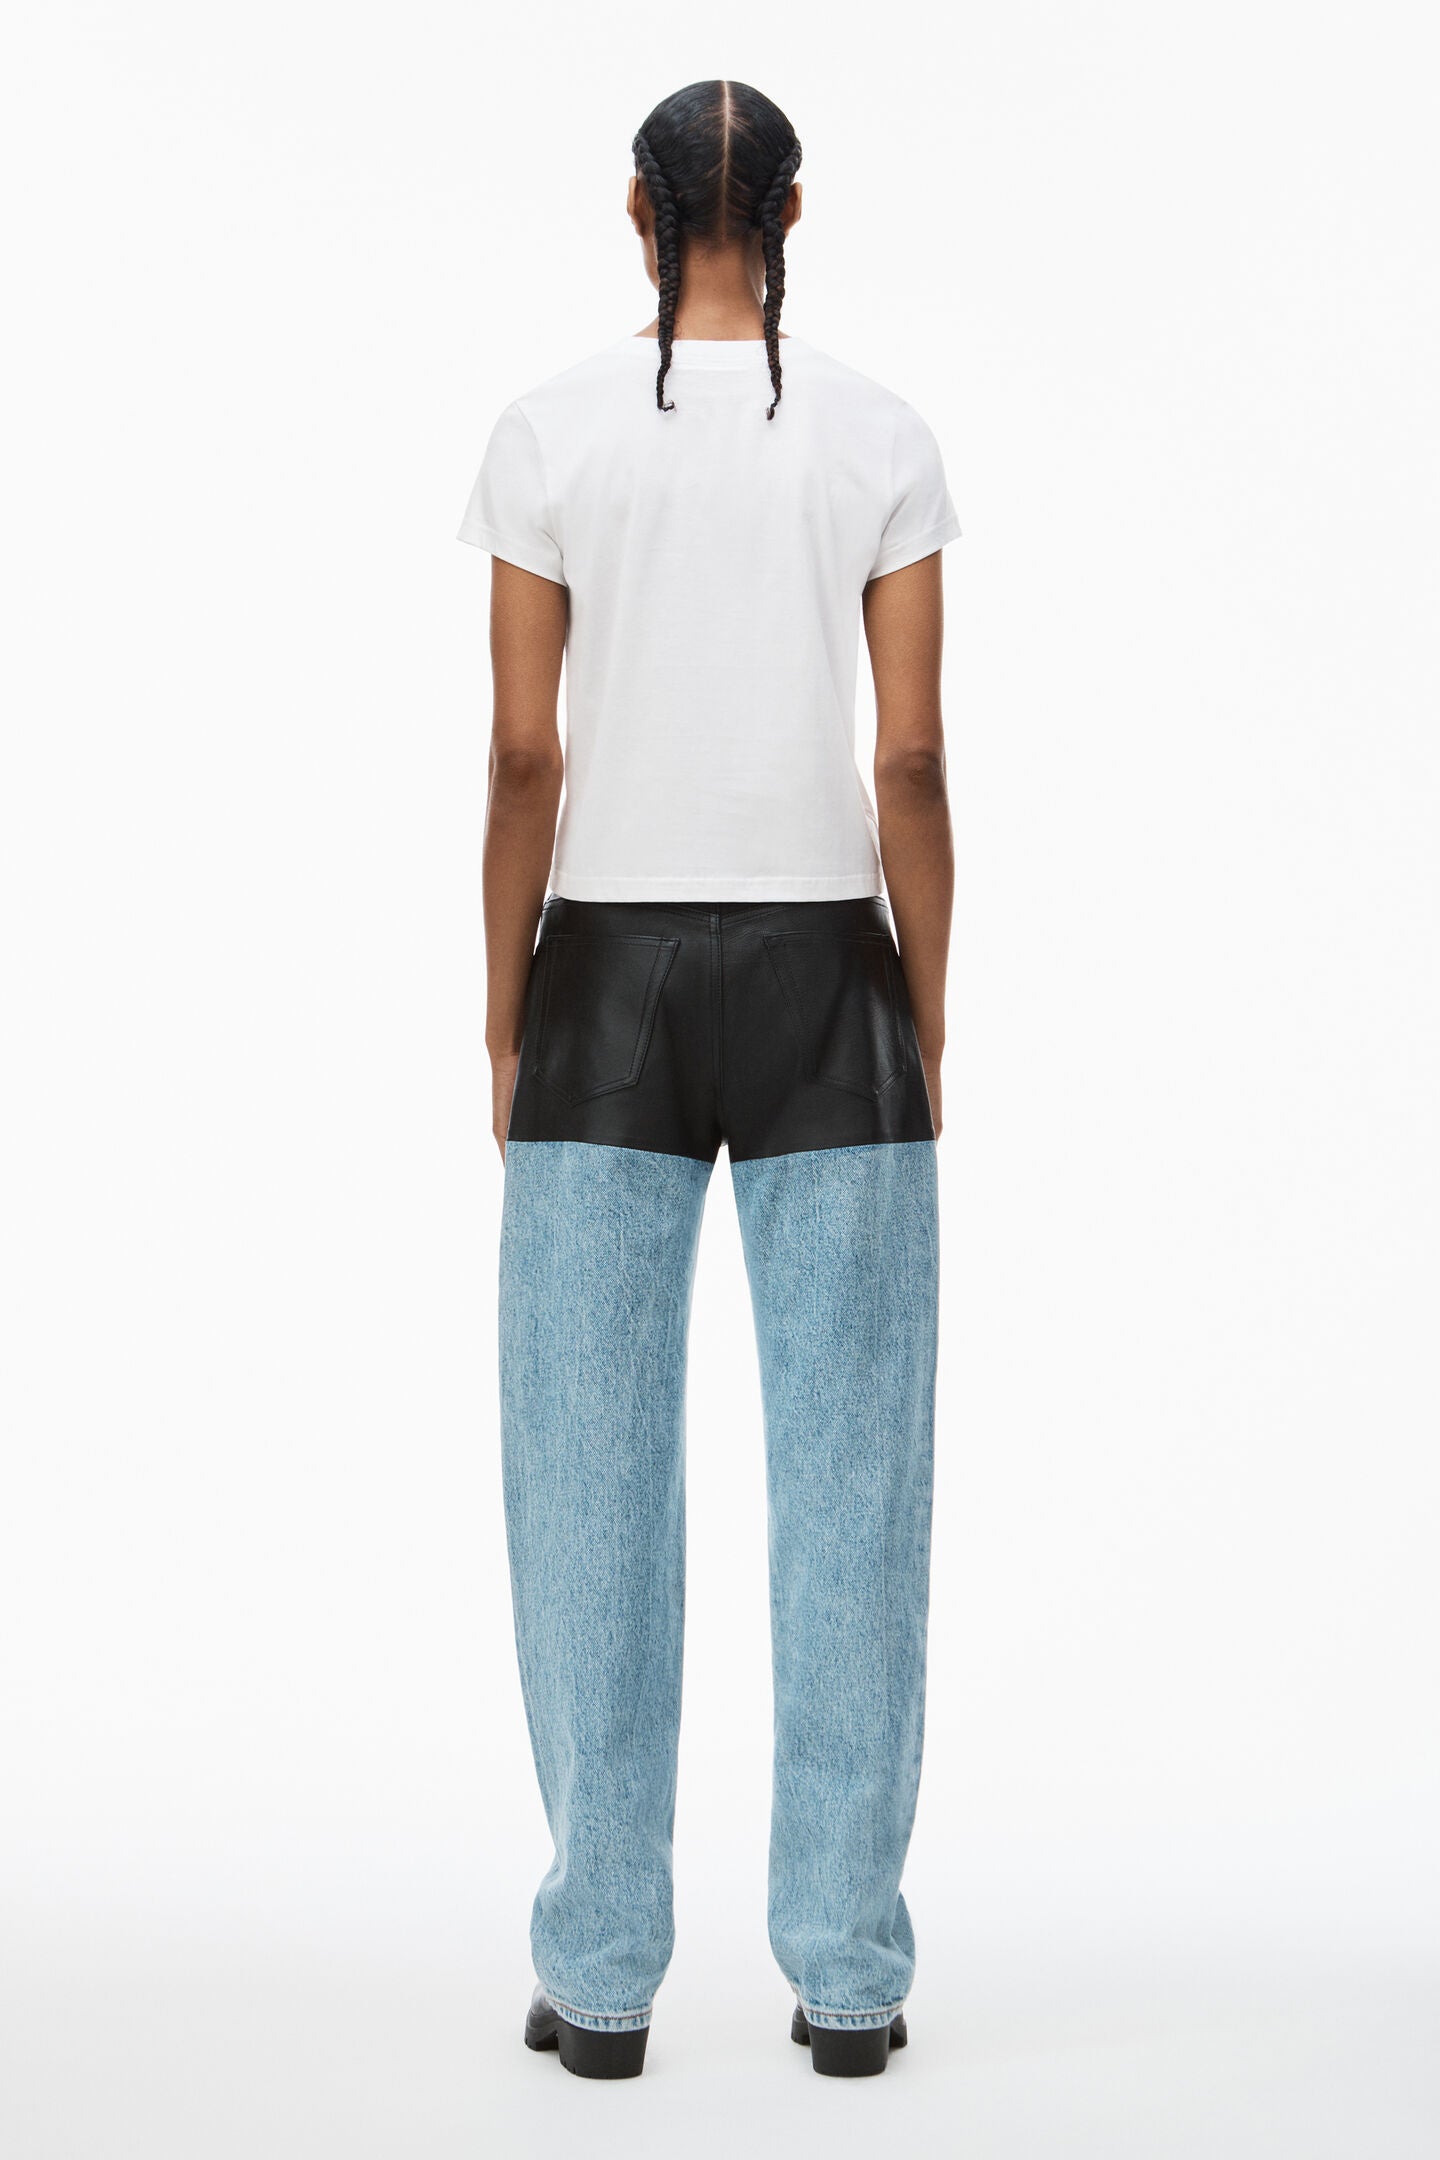 The Alexander Wang Essential Jsy Shrunk Tee W Puff Logo and Bound Neck in White available at The New Trend Australia